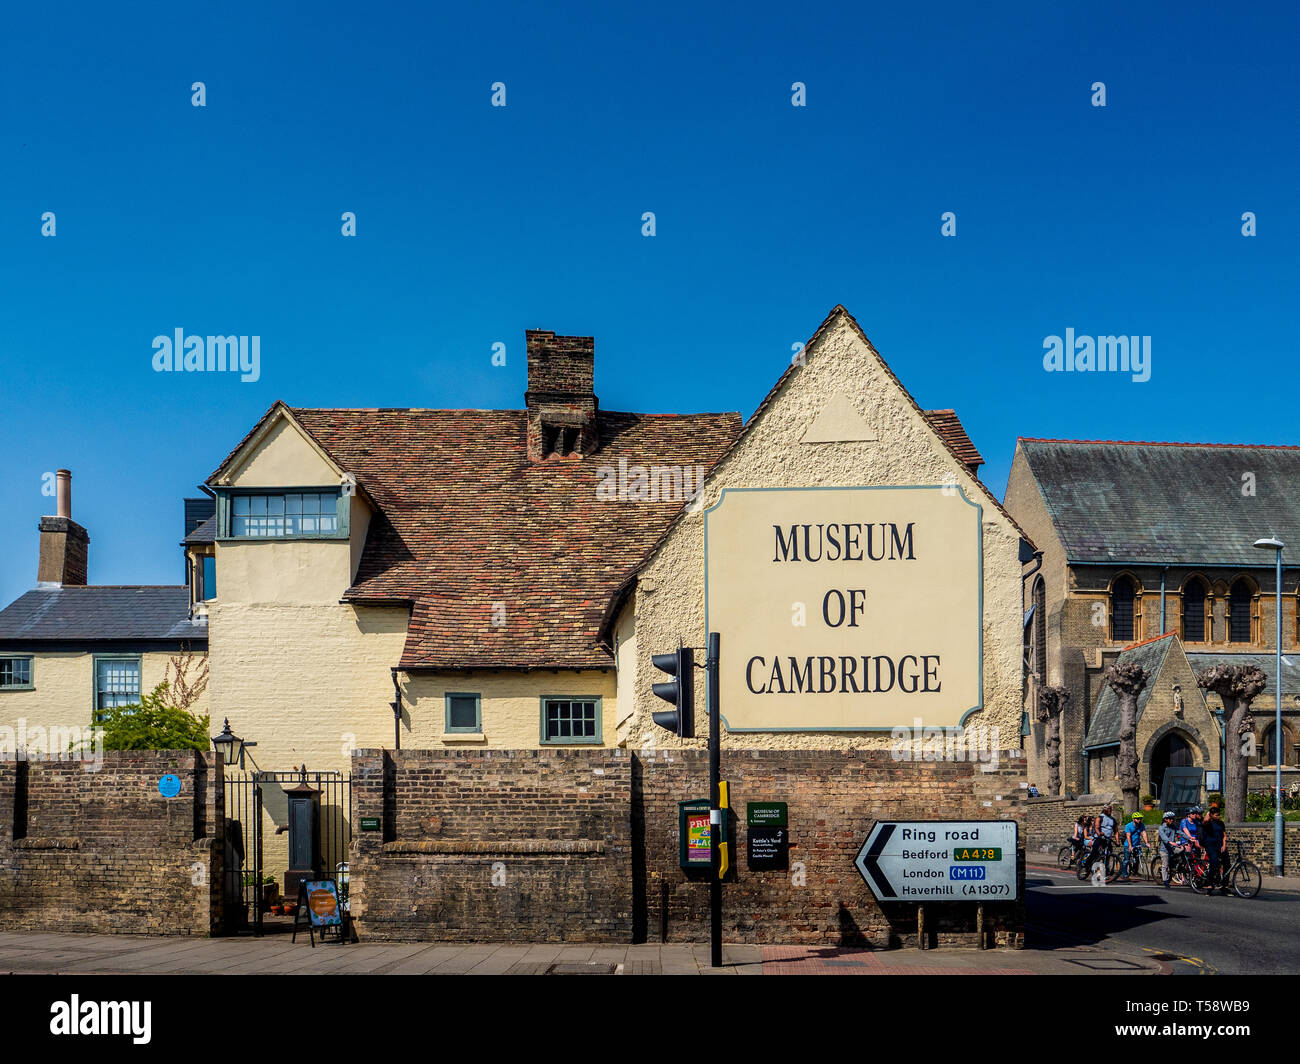 Museum of Cambridge also known as Cambridge Folk Museum n Castle Street, Central Cambridge UK. Grade II listed 17th century former coaching inn. Stock Photo